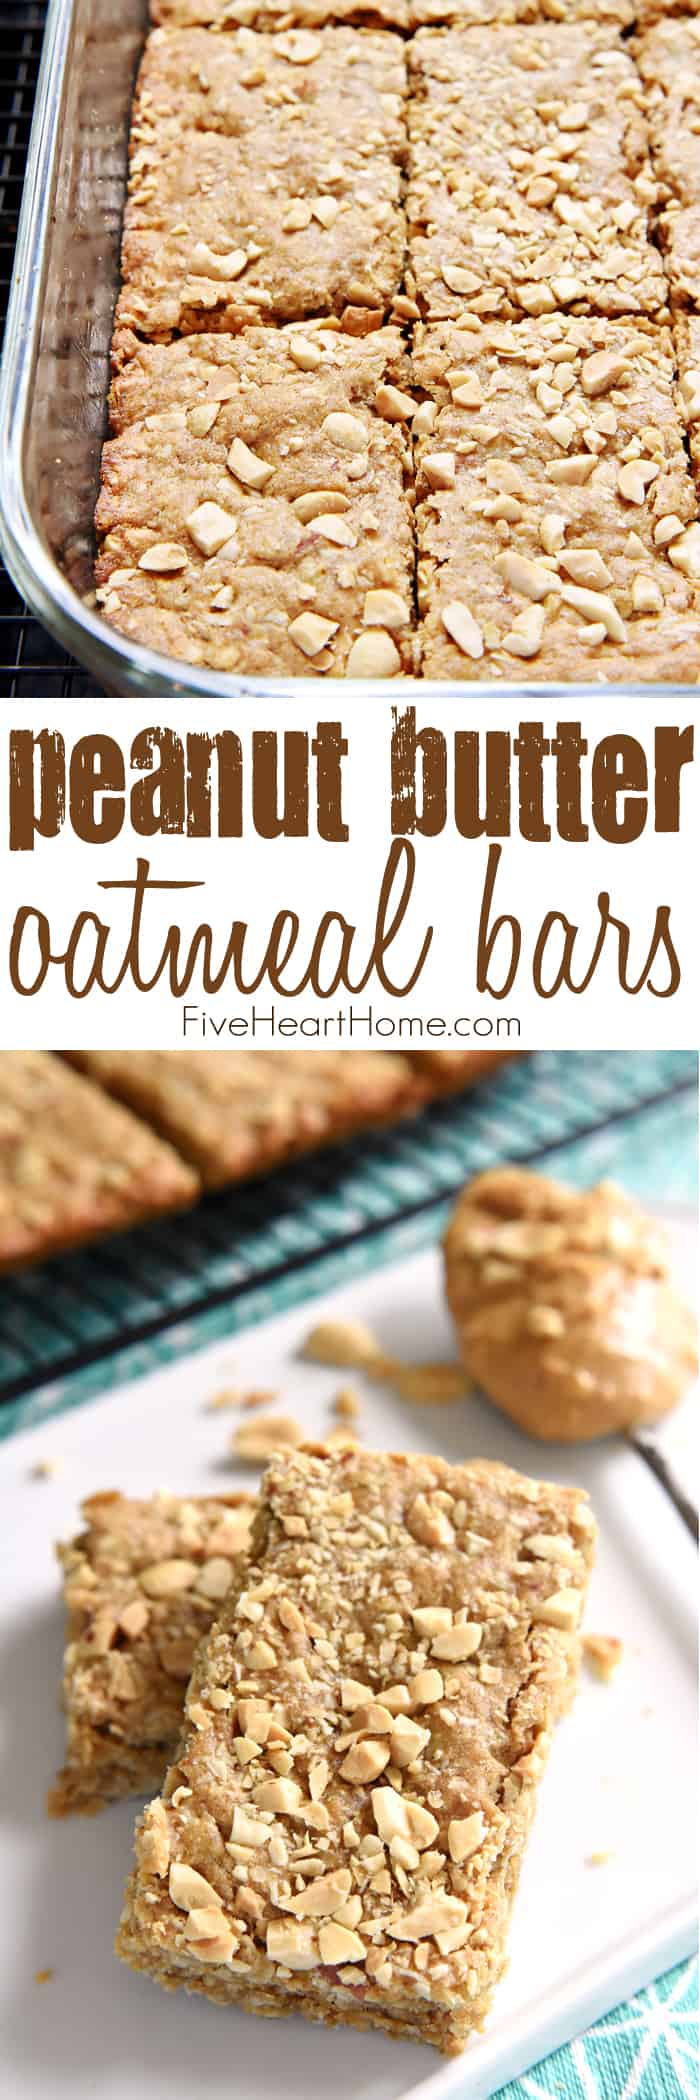 Peanut Butter Oatmeal Bars ~ loaded with wholesome oatmeal and whole wheat flour, flavored with peanut butter, and sweetened with honey, these soft-baked oatmeal bars make a yummy, on-the-go breakfast or snack! | FiveHeartHome.com via @fivehearthome